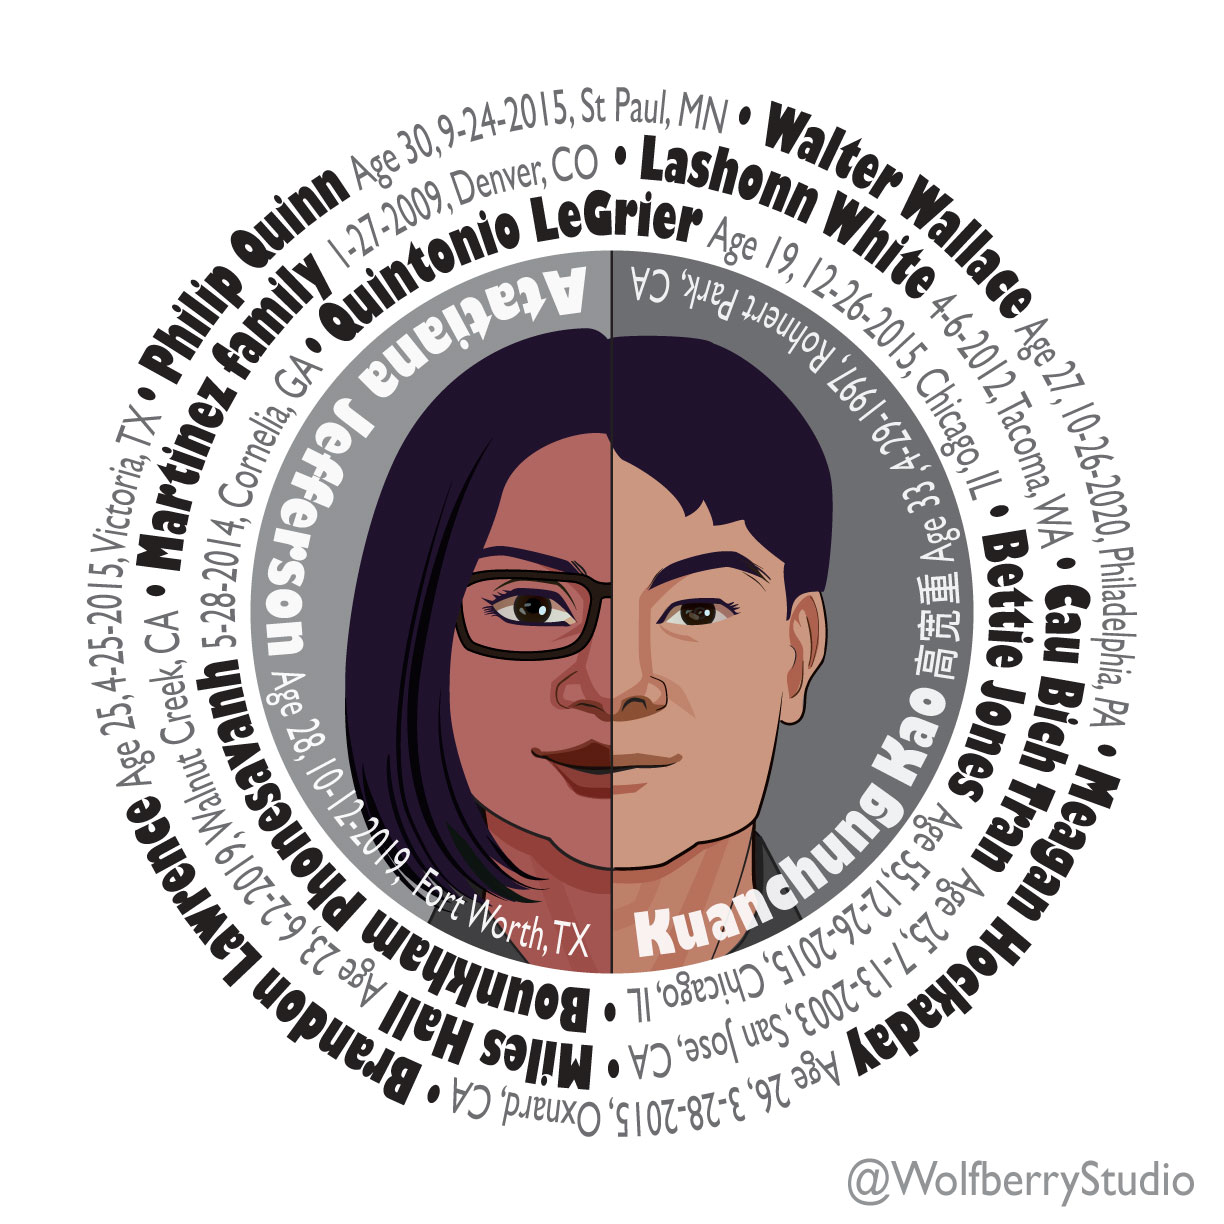 composite portrait with Black woman's face on left and Chinese man's face on right, framed by list of 11 names